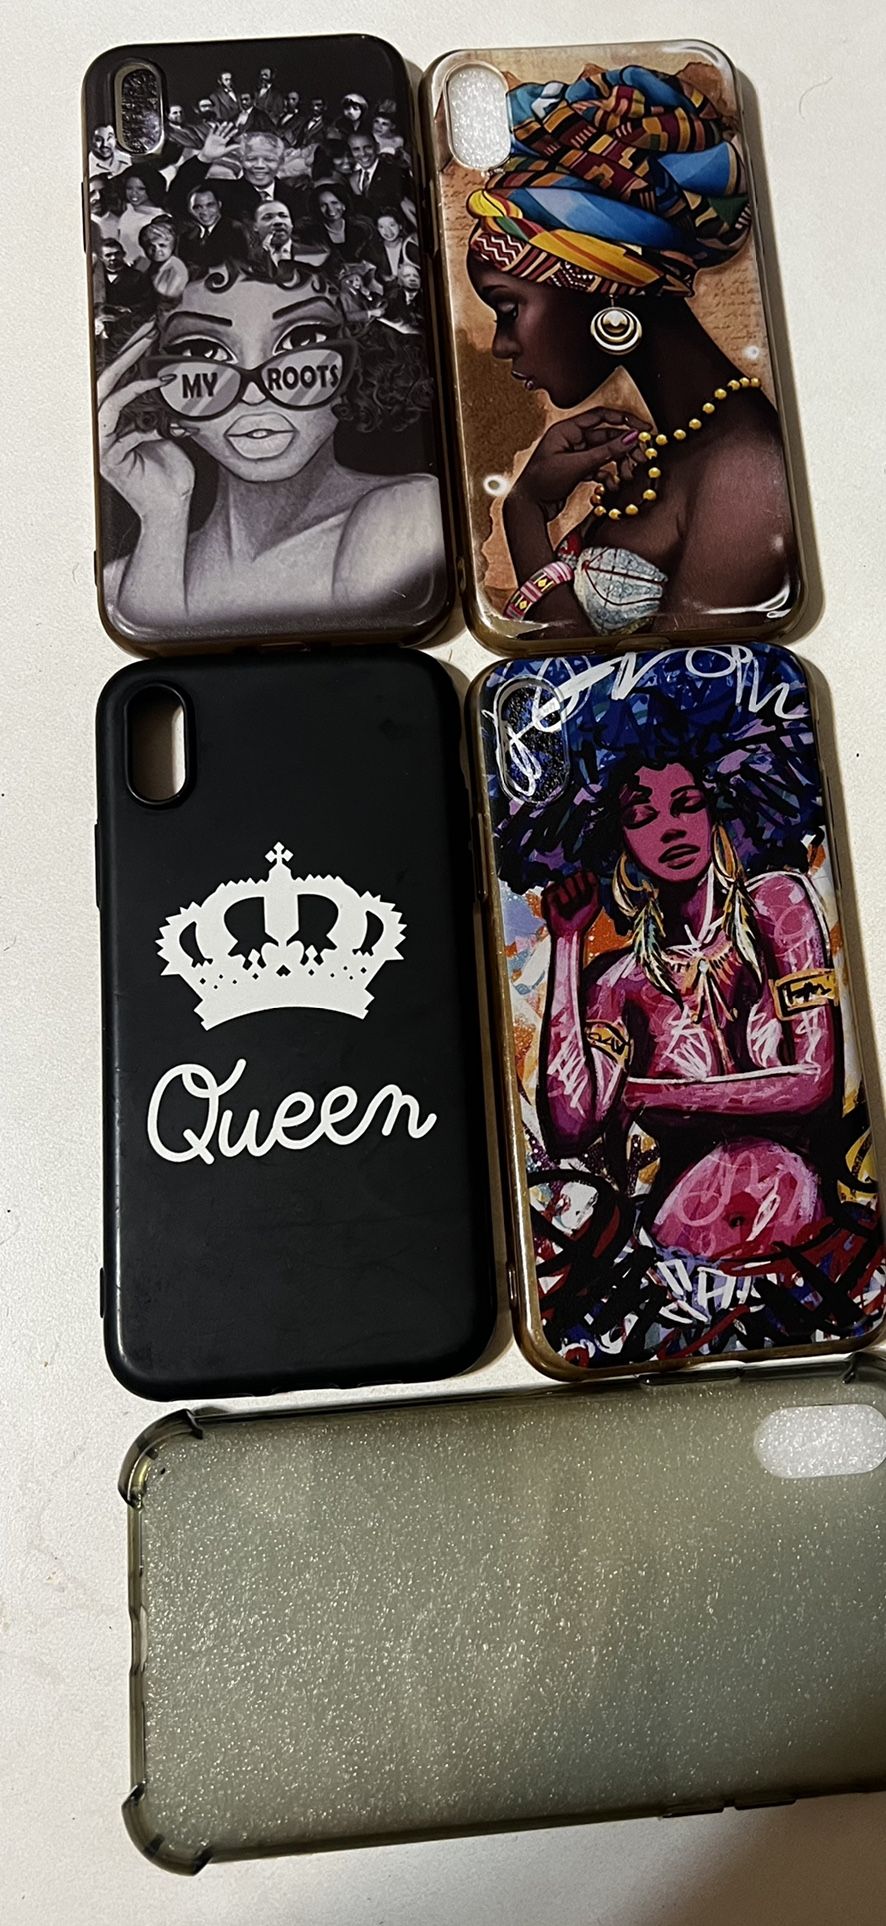 IPhone XS Cases And Covers - Qty 5